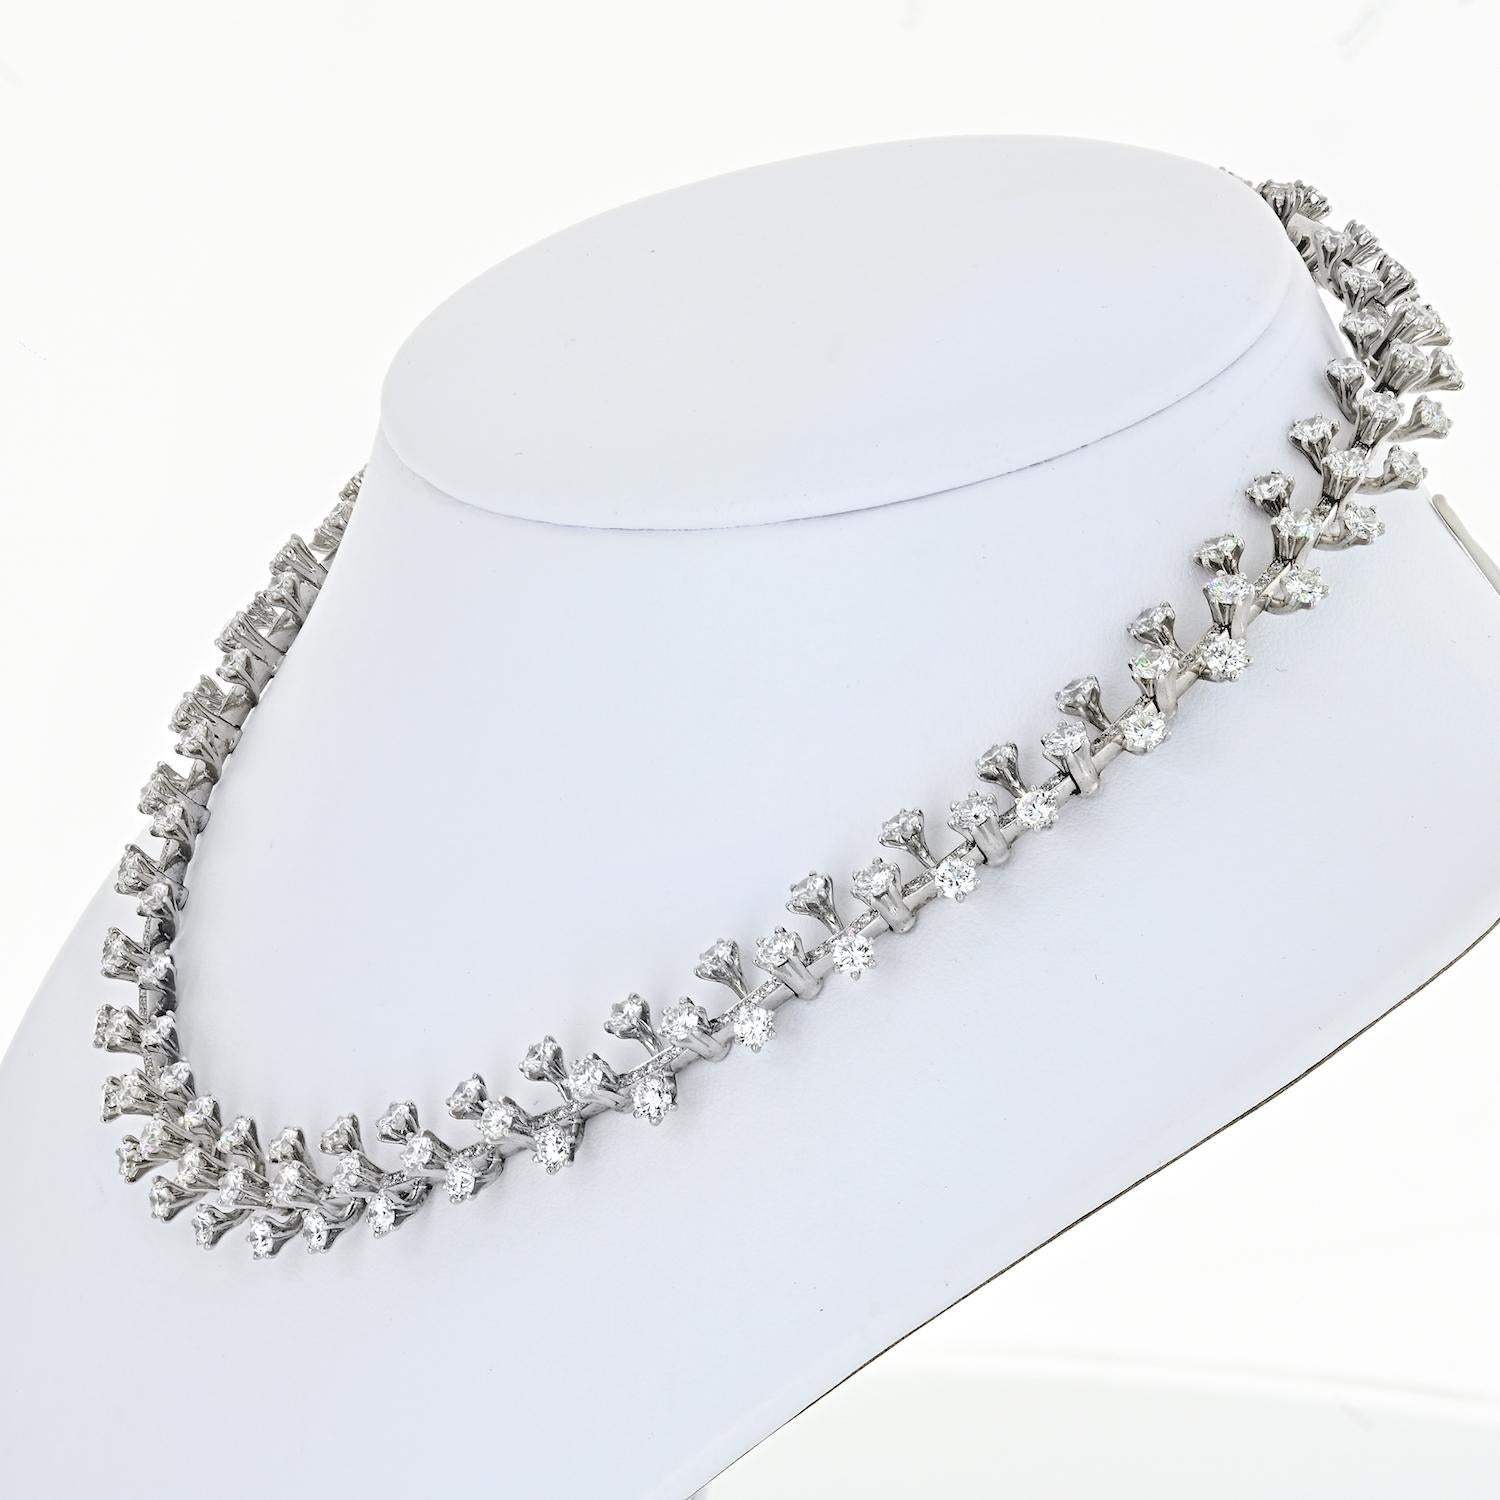 Tiffany & Co. Platinum 20 Carat Diamond Collar Necklace.
Set with round brilliant cut diamonds of amazing quality. Superb condition. Comes with a Tiffany box. 
16 inches. 